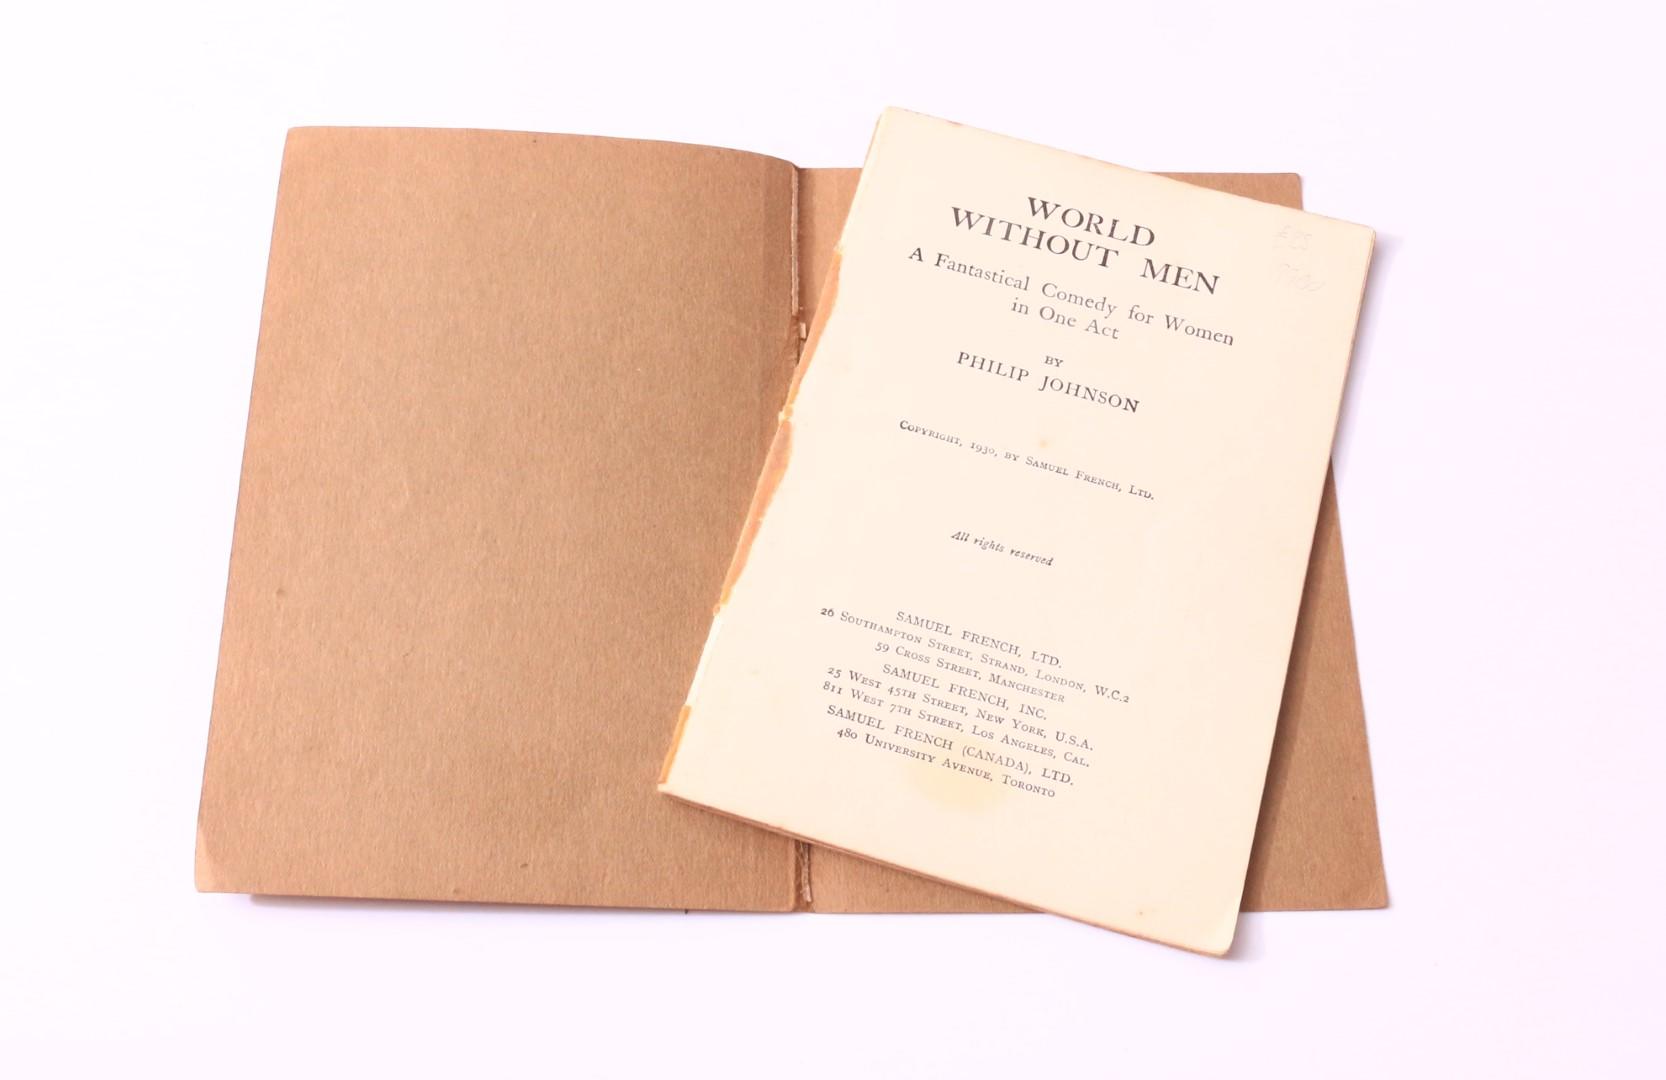 Philip Johnson - World Without Men: A Fantastical Comedy for Women in One Act - Samuel French, 1930, First Edition.